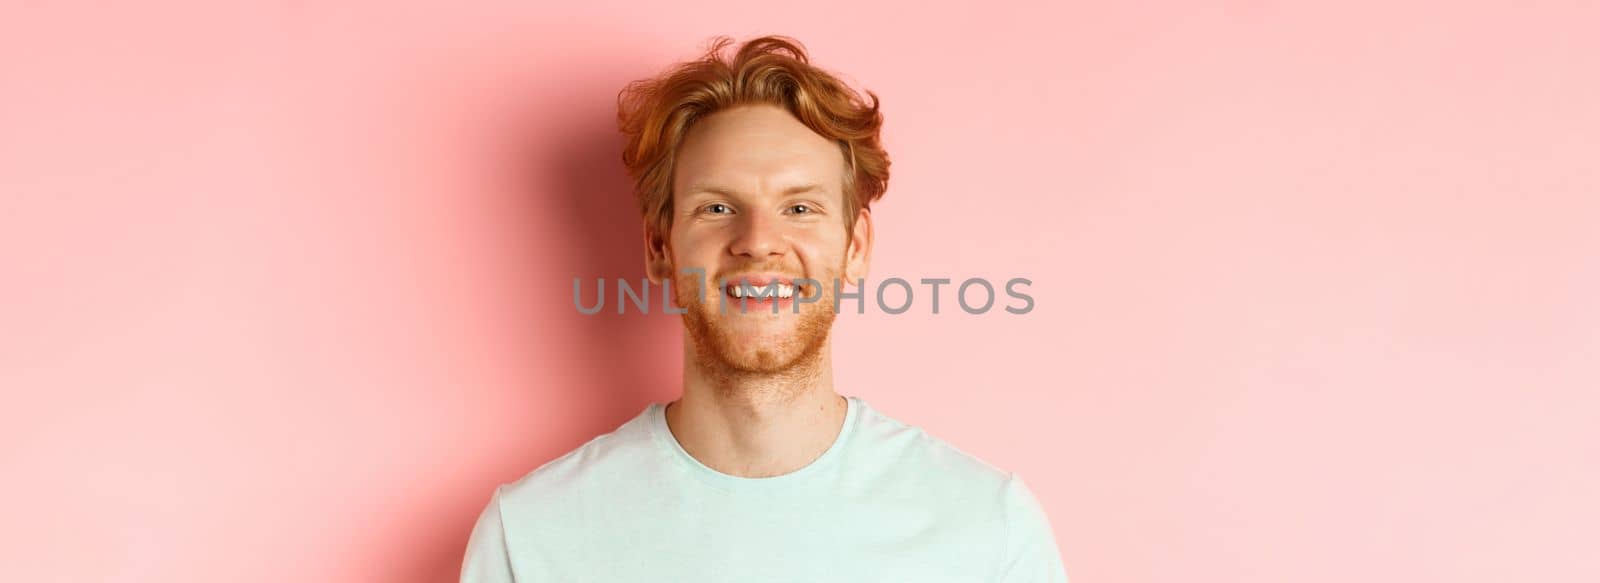 Happy young man with beard and messsy red haircut, smiling with white teeth and cheerful expression, standing over pink background.